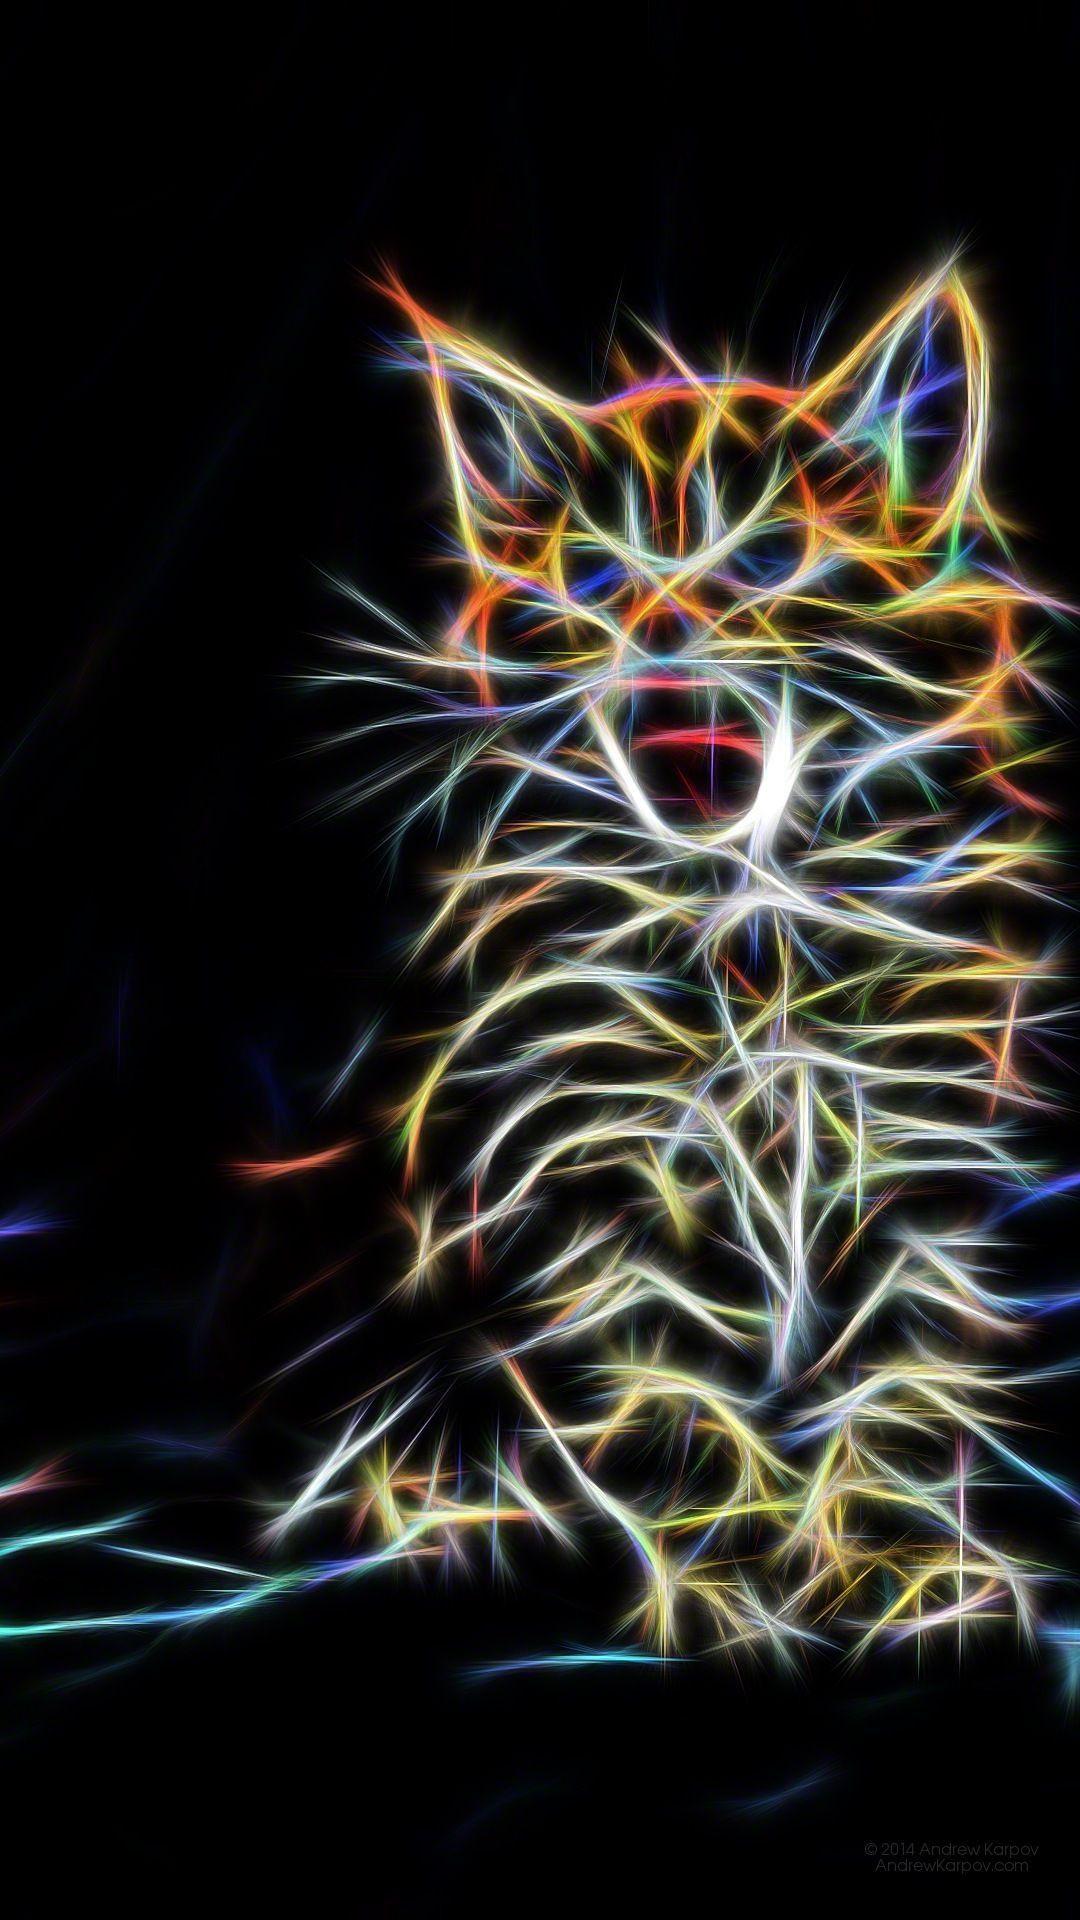 Cats made of fantasy - Photography Art - 1080 x 1920 background ...